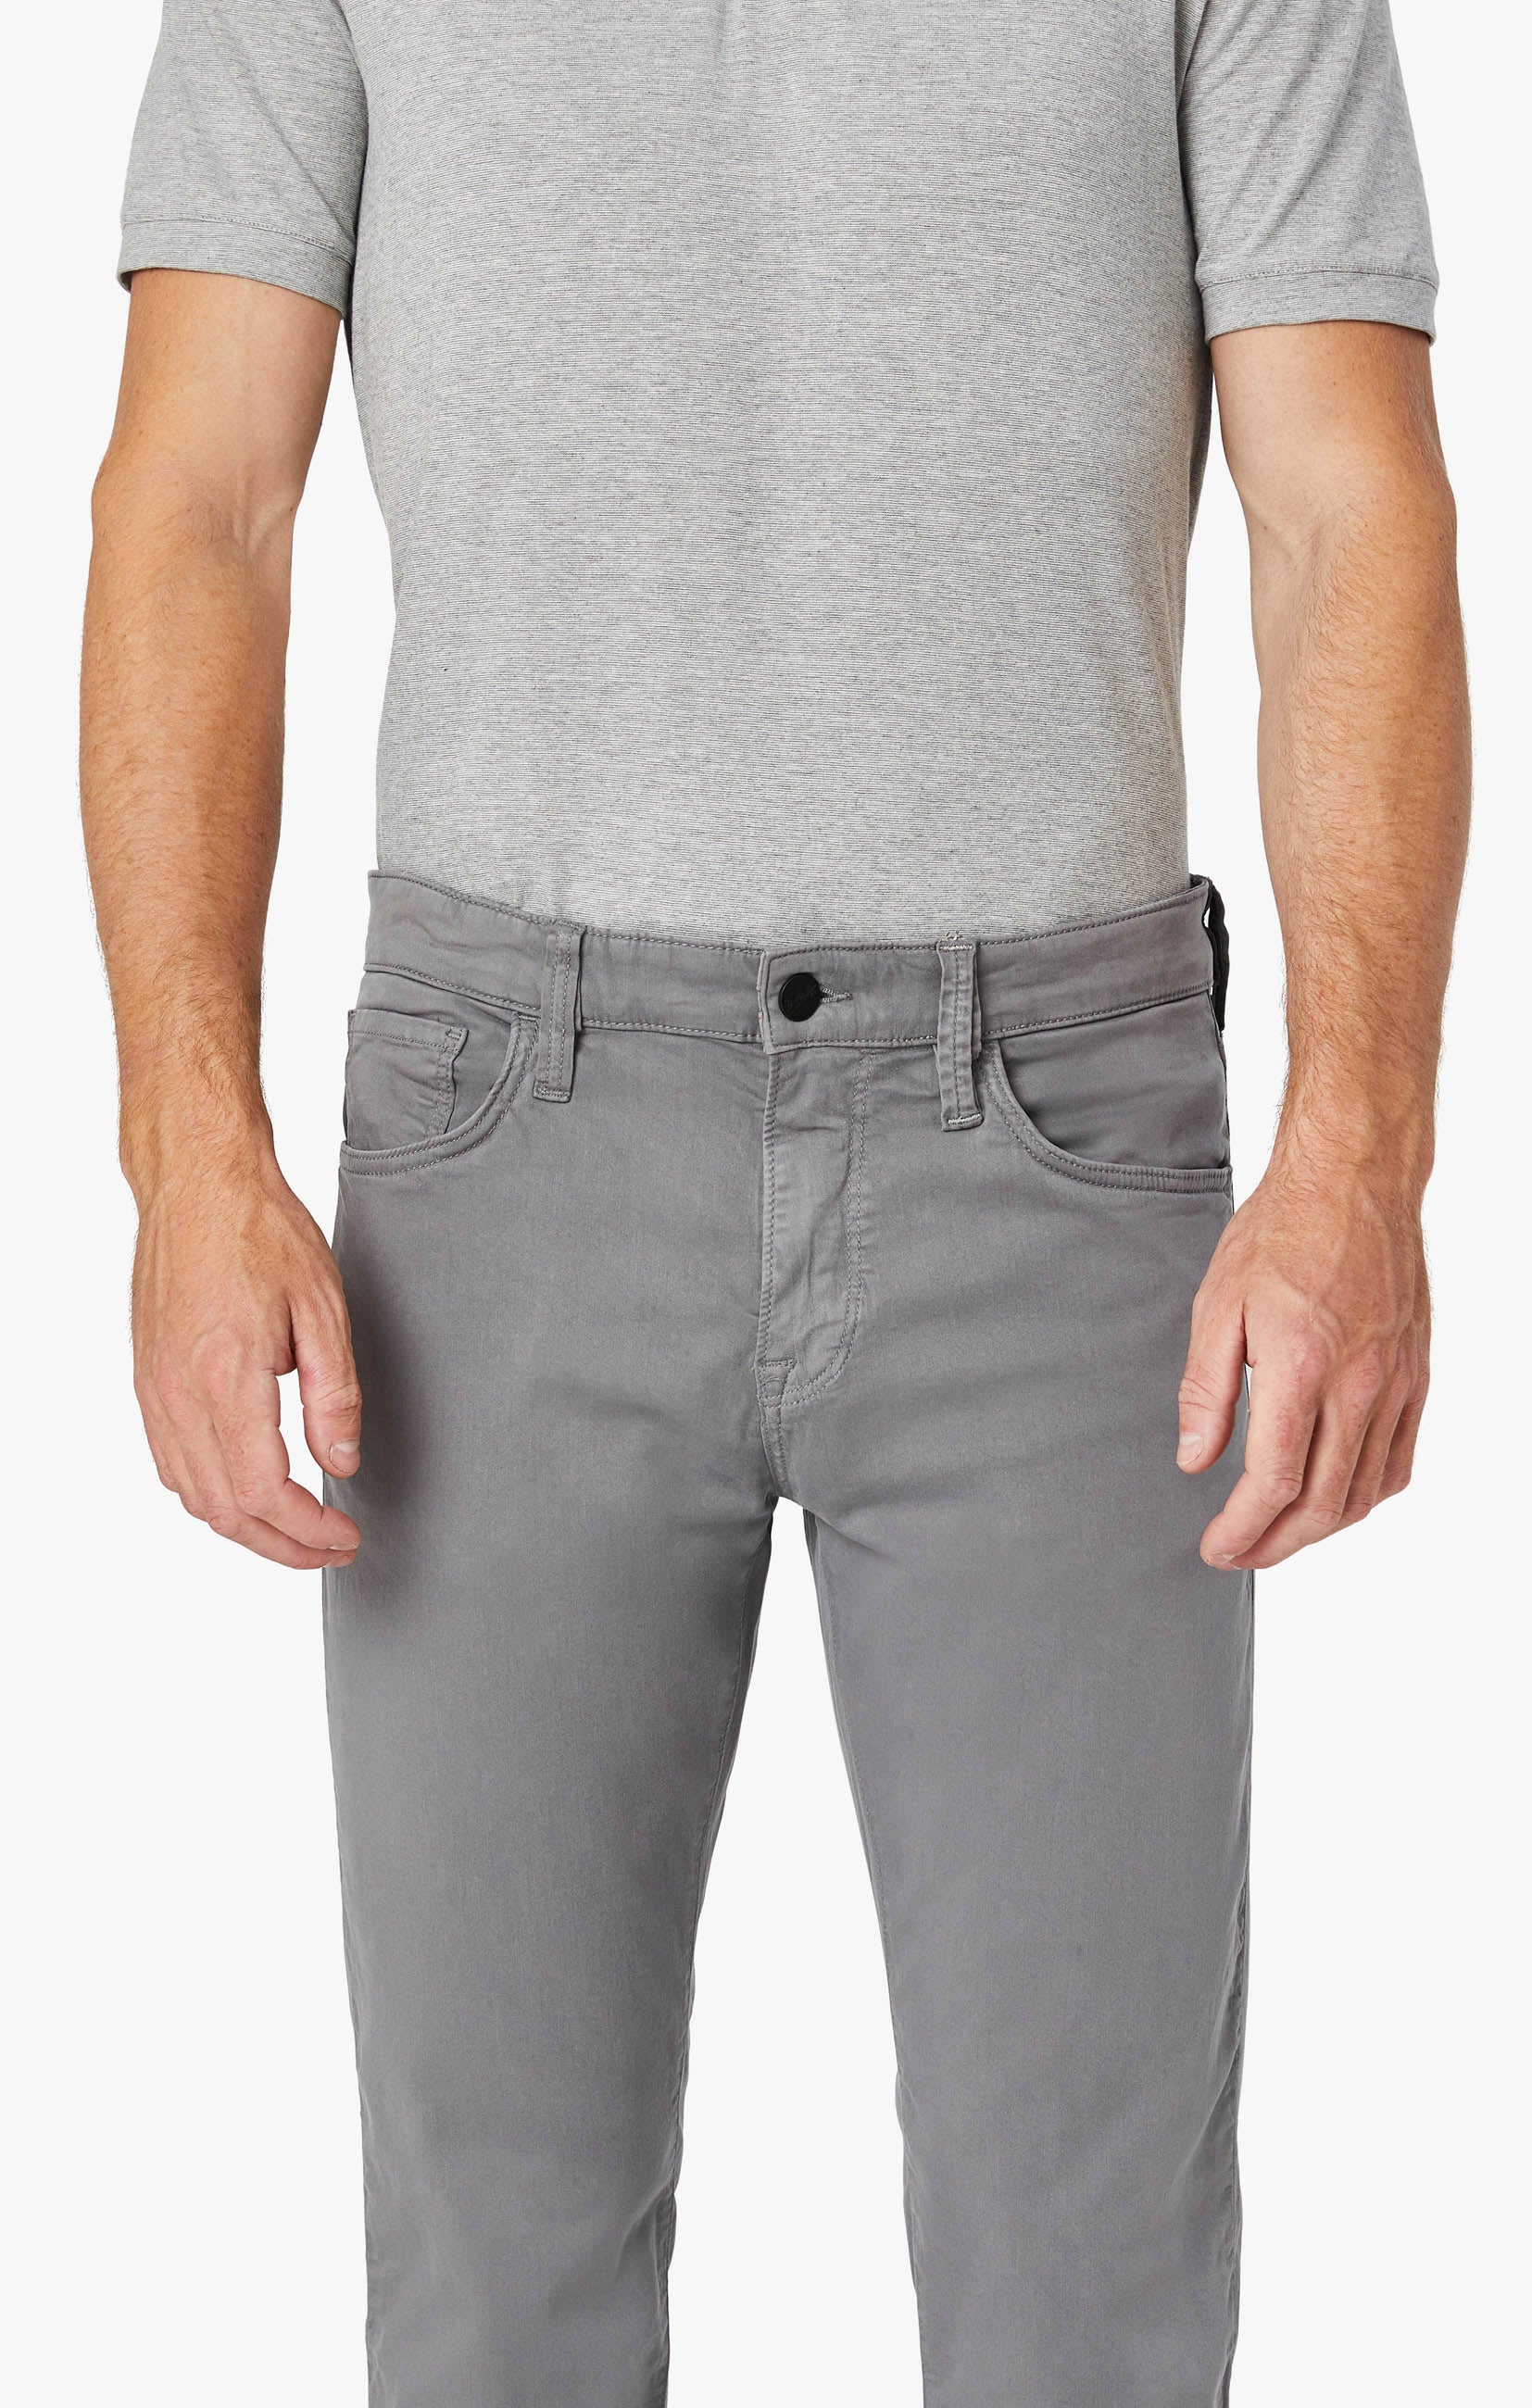 Courage Straight Leg Pants in Shark Twill Image 4